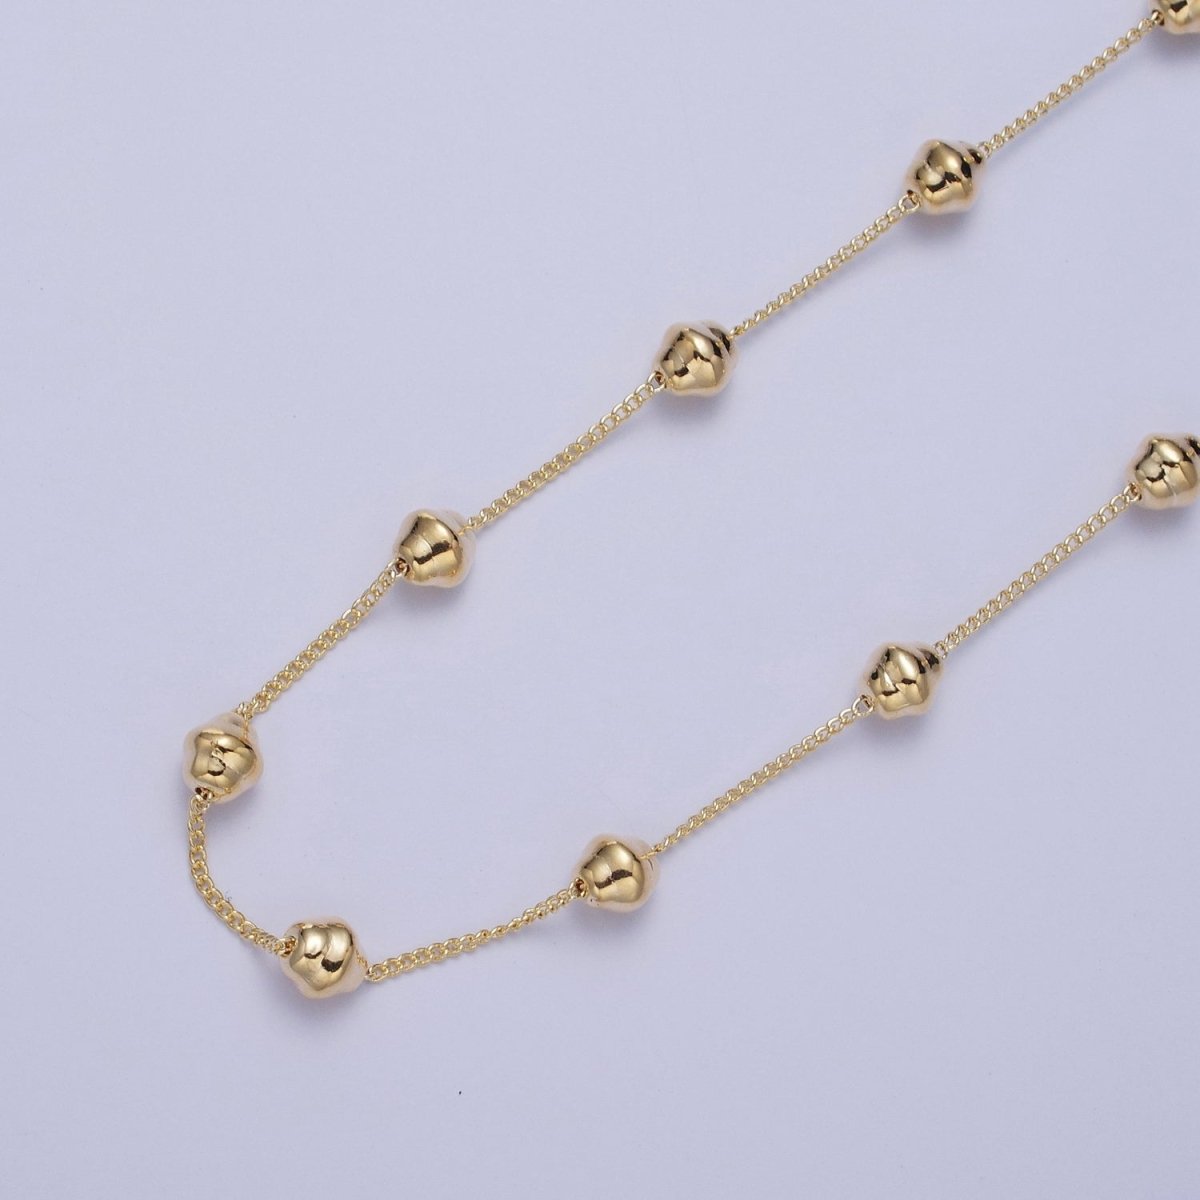 Gold Satellite Geometric Bead Chain Wholesale by Yard For Jewelry Making Component | ROLL-833 Clearance Pricing - DLUXCA